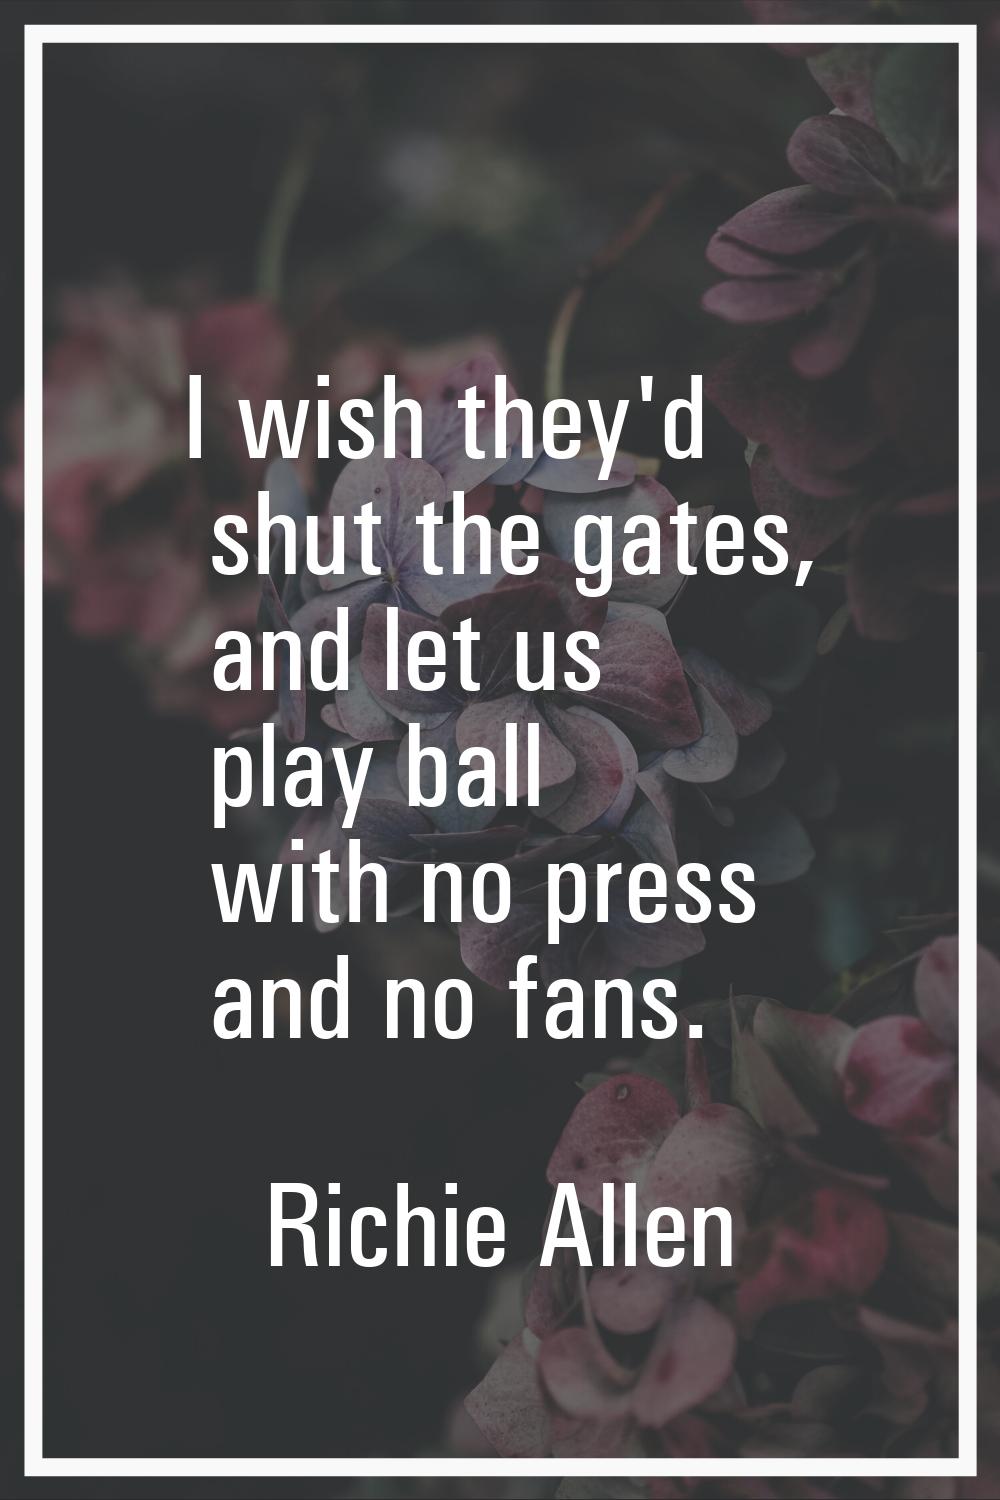 I wish they'd shut the gates, and let us play ball with no press and no fans.